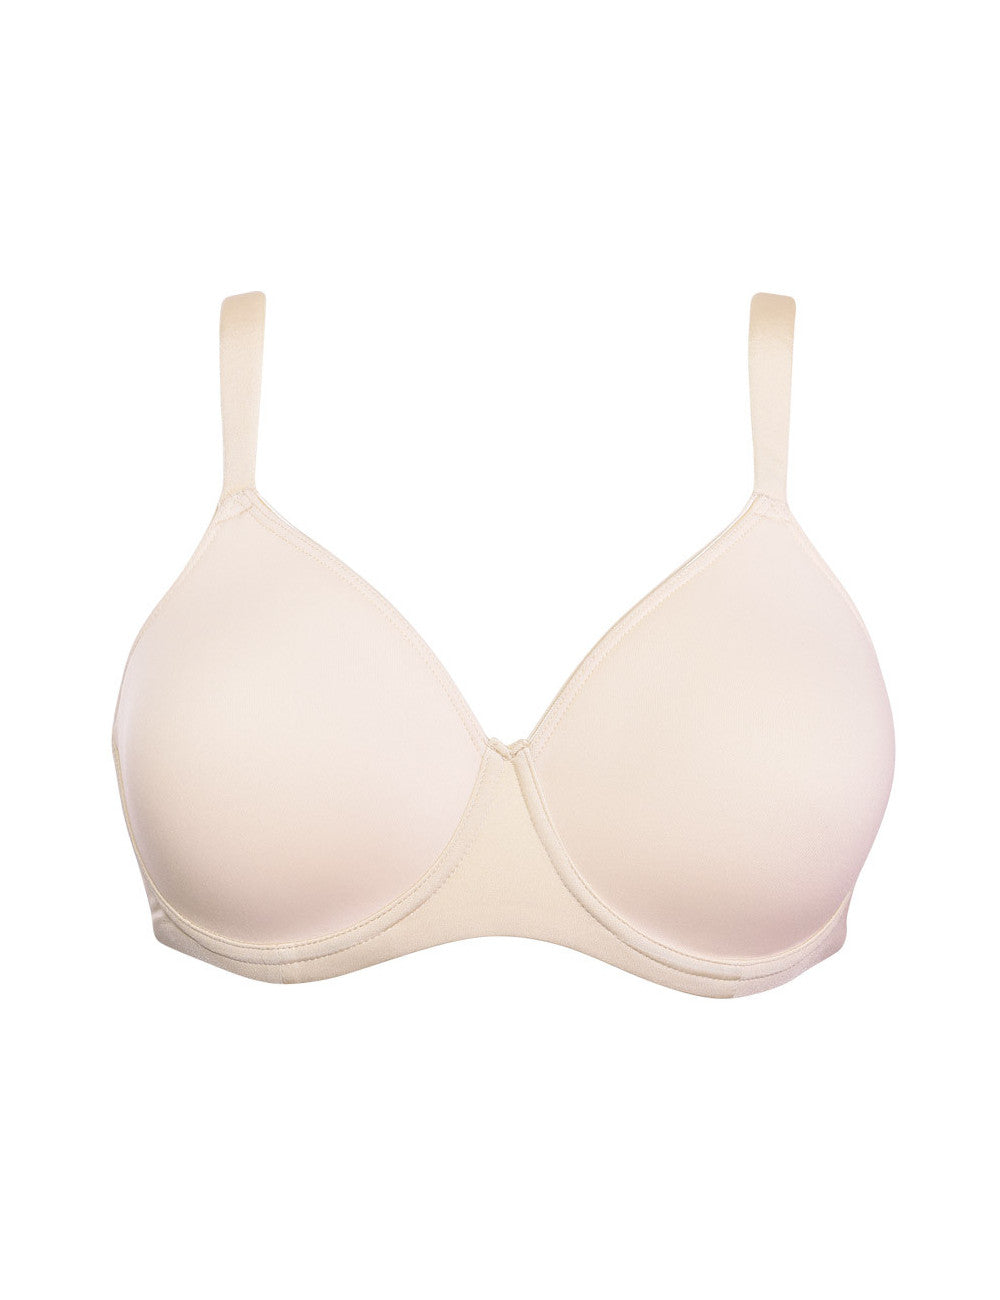 Beige, underwire spacer cup bra from the Plus line by SIéLEI from Italy.